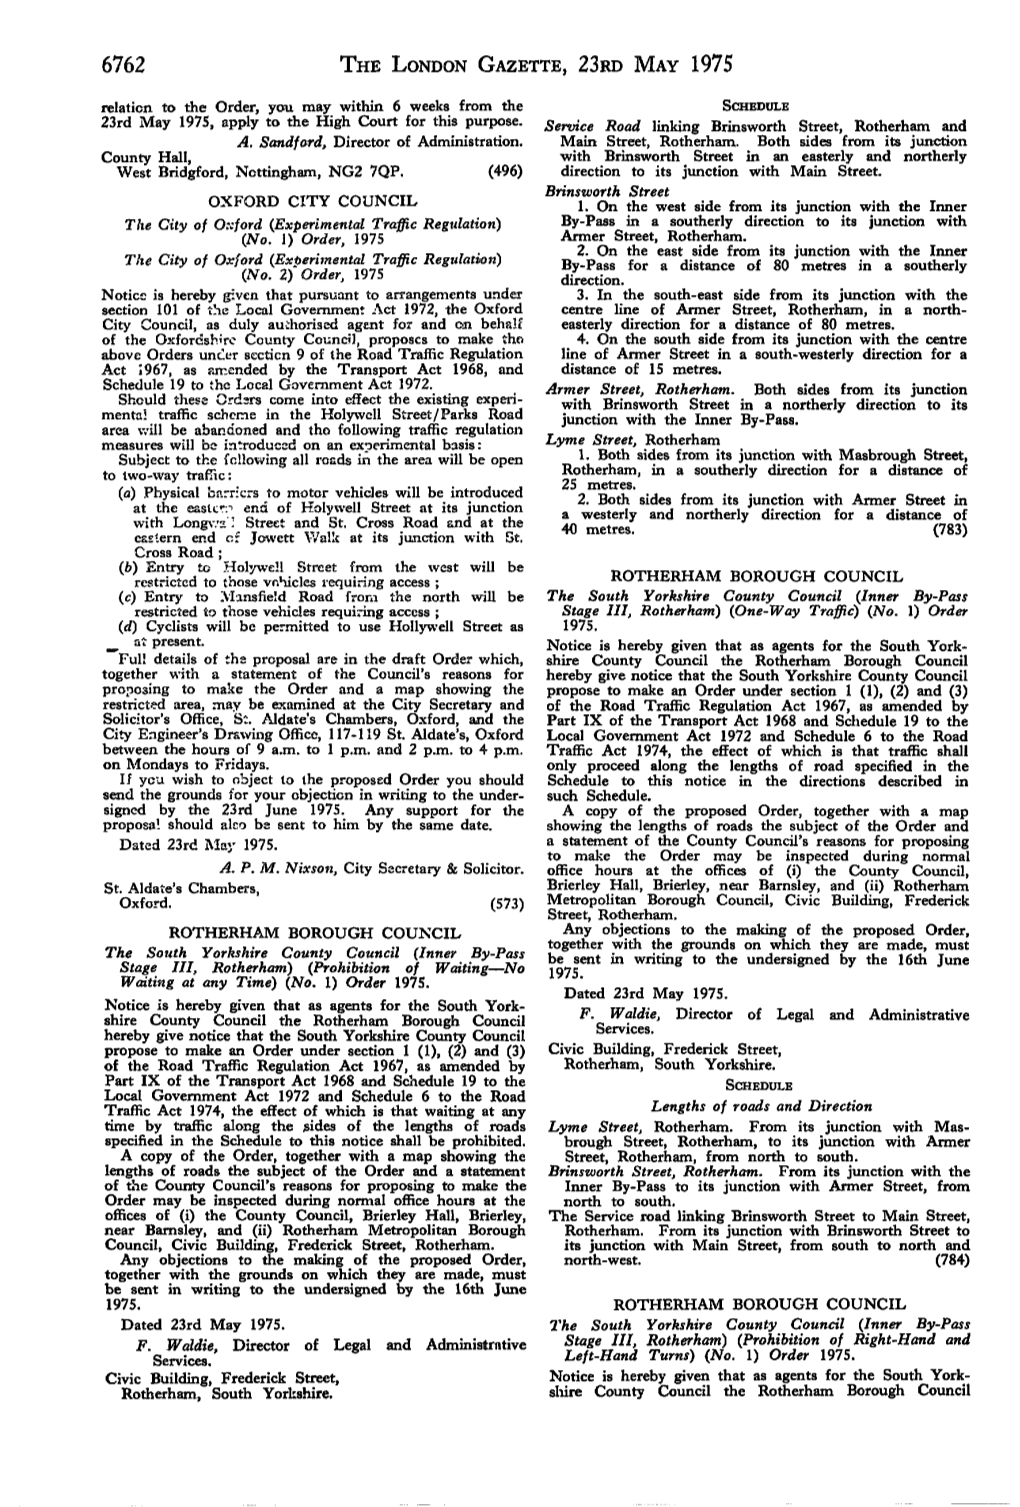 6762 the LONDON GAZETTE, 23RD MAY 1975 Relation to the Order, You May Within 6 Weeks from the SCHEDULE 23Rd May 1975, Apply to the High Court for This Purpose